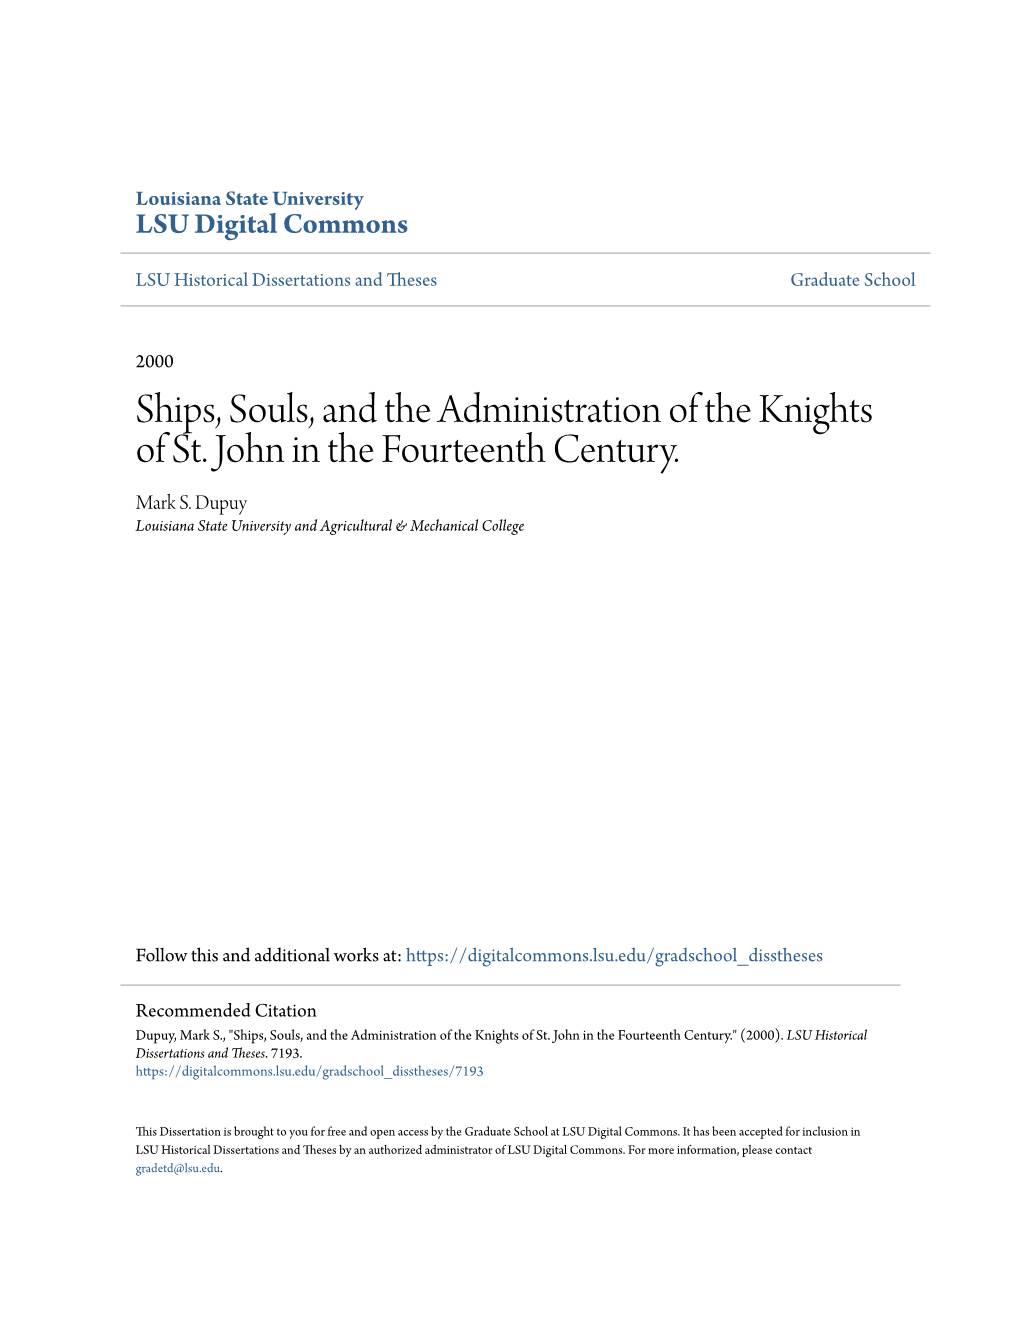 Ships, Souls, and the Administration of the Knights of St. John in the Fourteenth Century